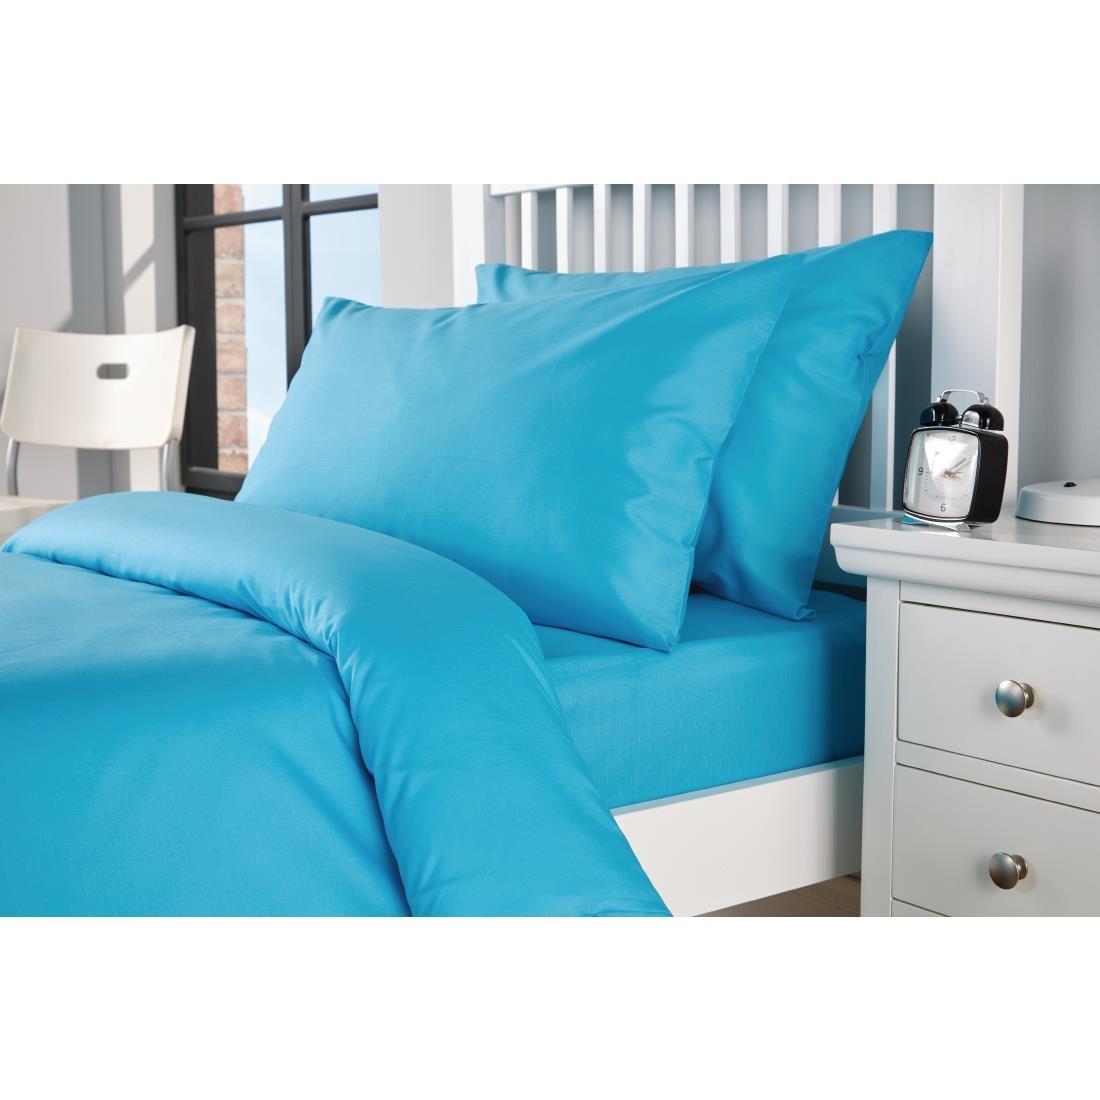 Mitre Essentials Spectrum Housewife Pillowcase Turquoise (Pack of 2) - HB677  - 1